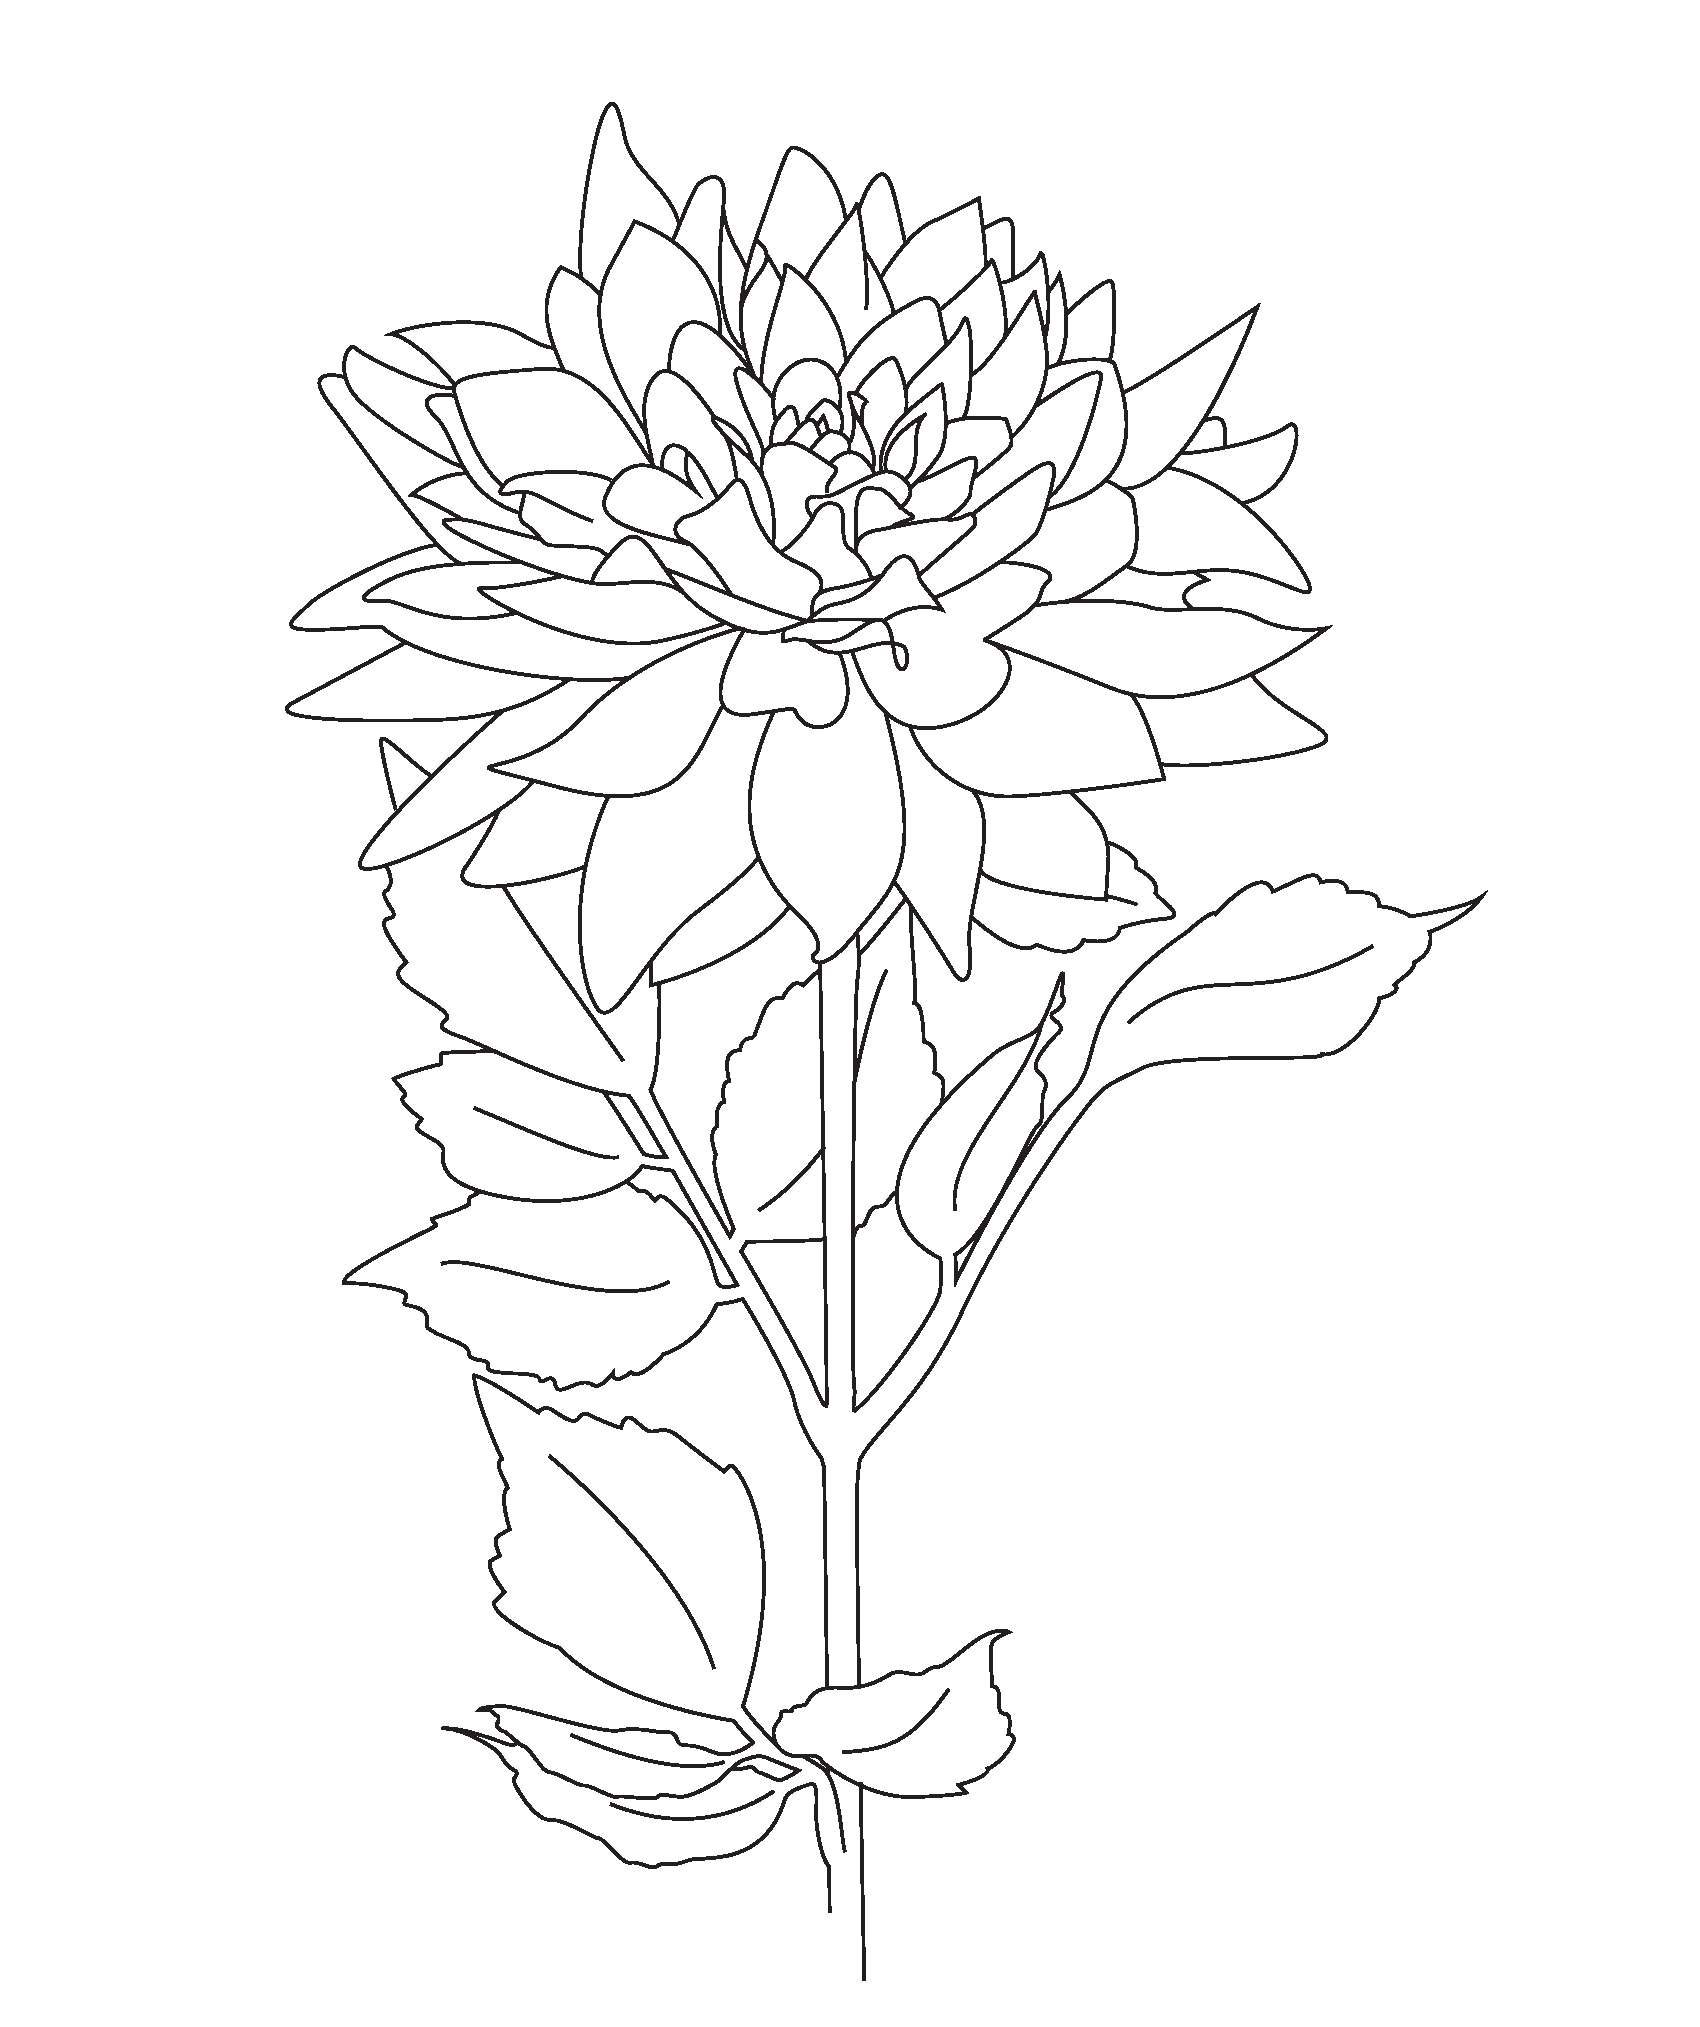 planting seeds coloring pages